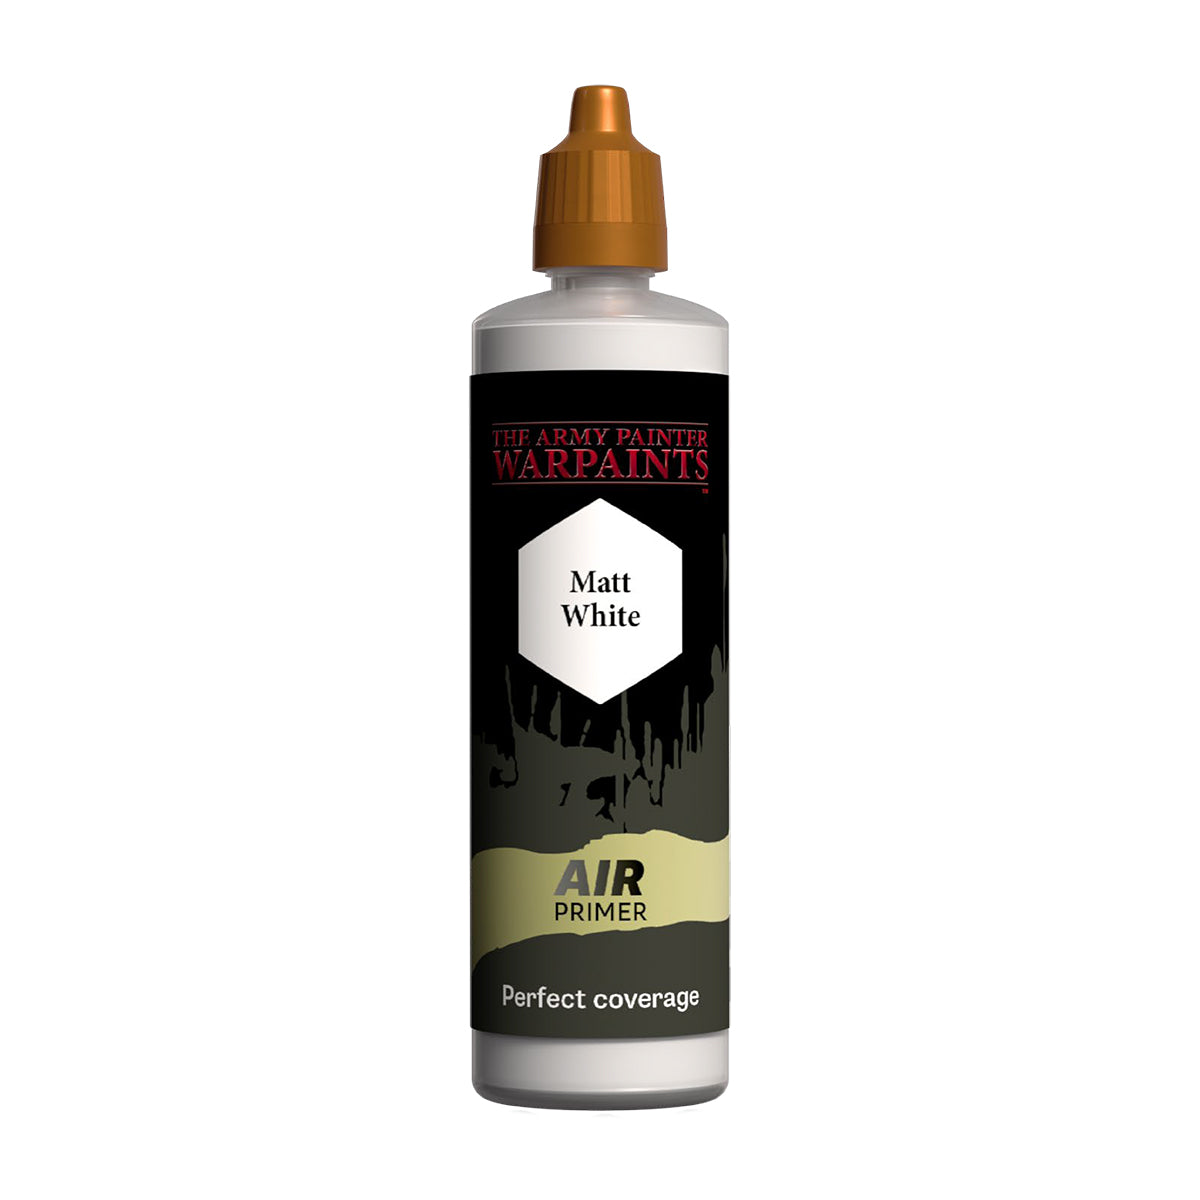 Army Painter primer--gloss/shine? - Tips & Advice: Painting